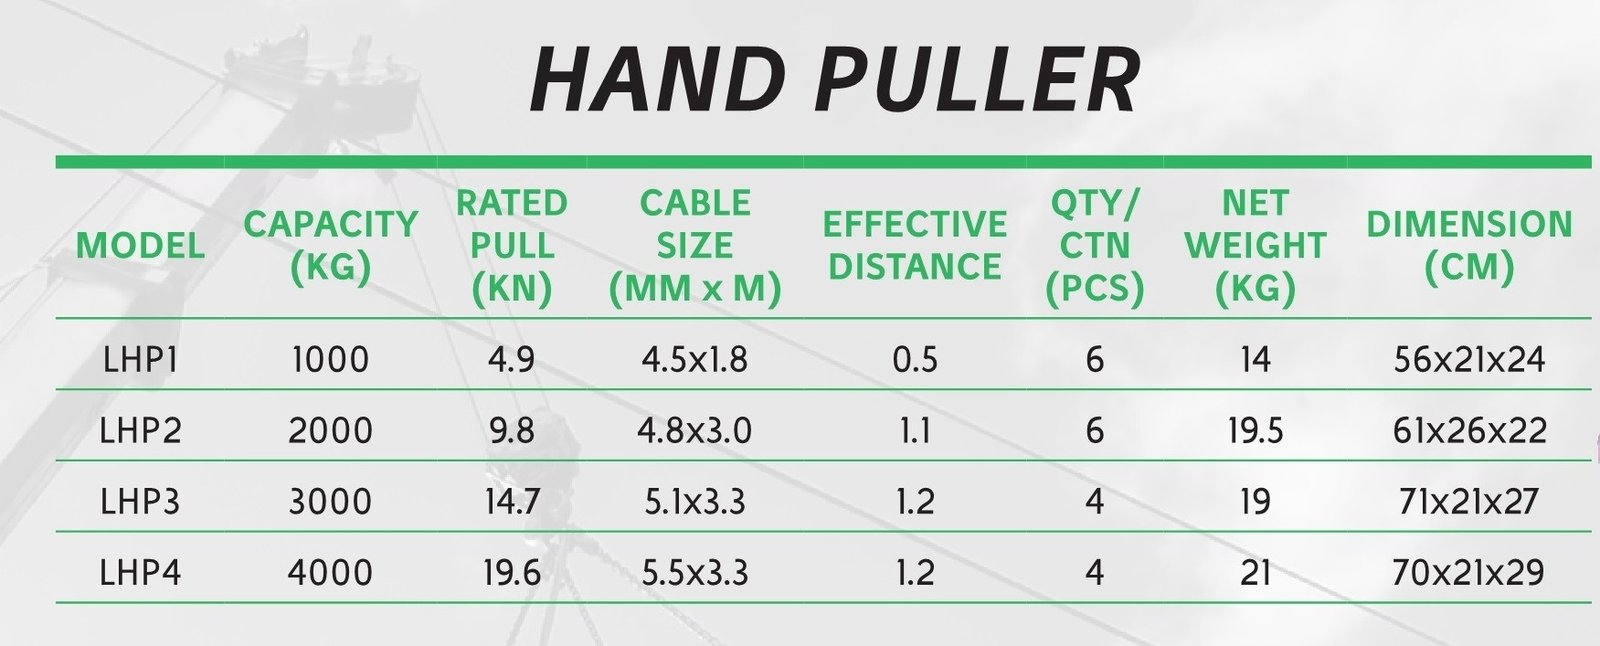 Hand Puller
Hand Puller supplier in Dubai and UAE
Hand Puller near me